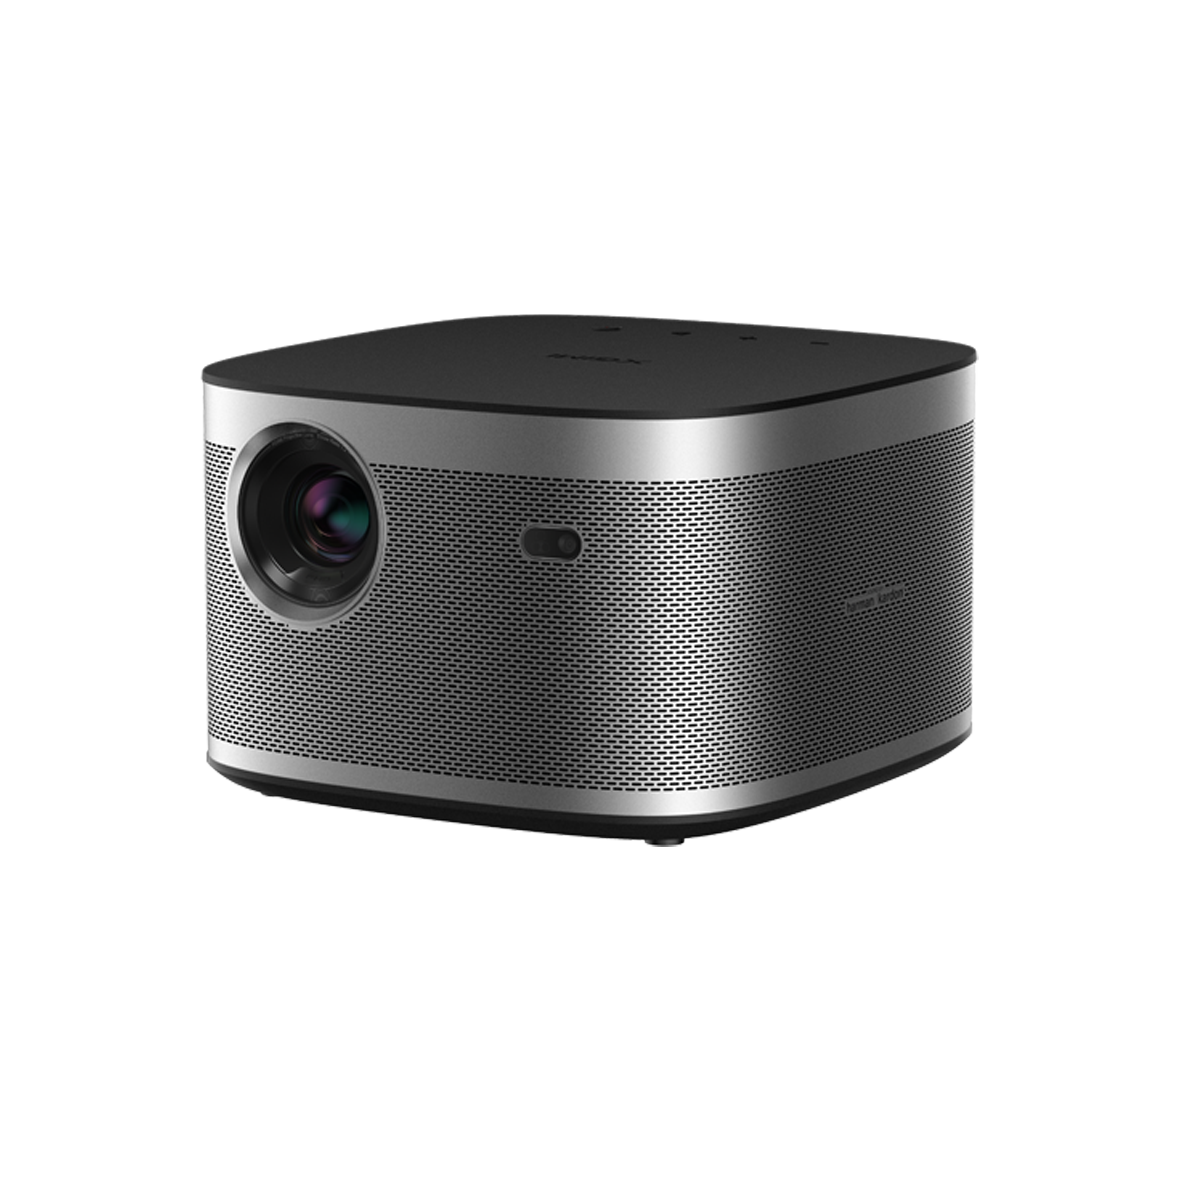 Find Android 10 0 XGIMI Horizon / Pro Projector 4K Resolution LED 2200 ANSI Lumens International DLP System Android TV 10 0 OS 2 32GB Auto Focus HDR10 Google Assistant Home Theater EU Plug for Sale on Gipsybee.com with cryptocurrencies